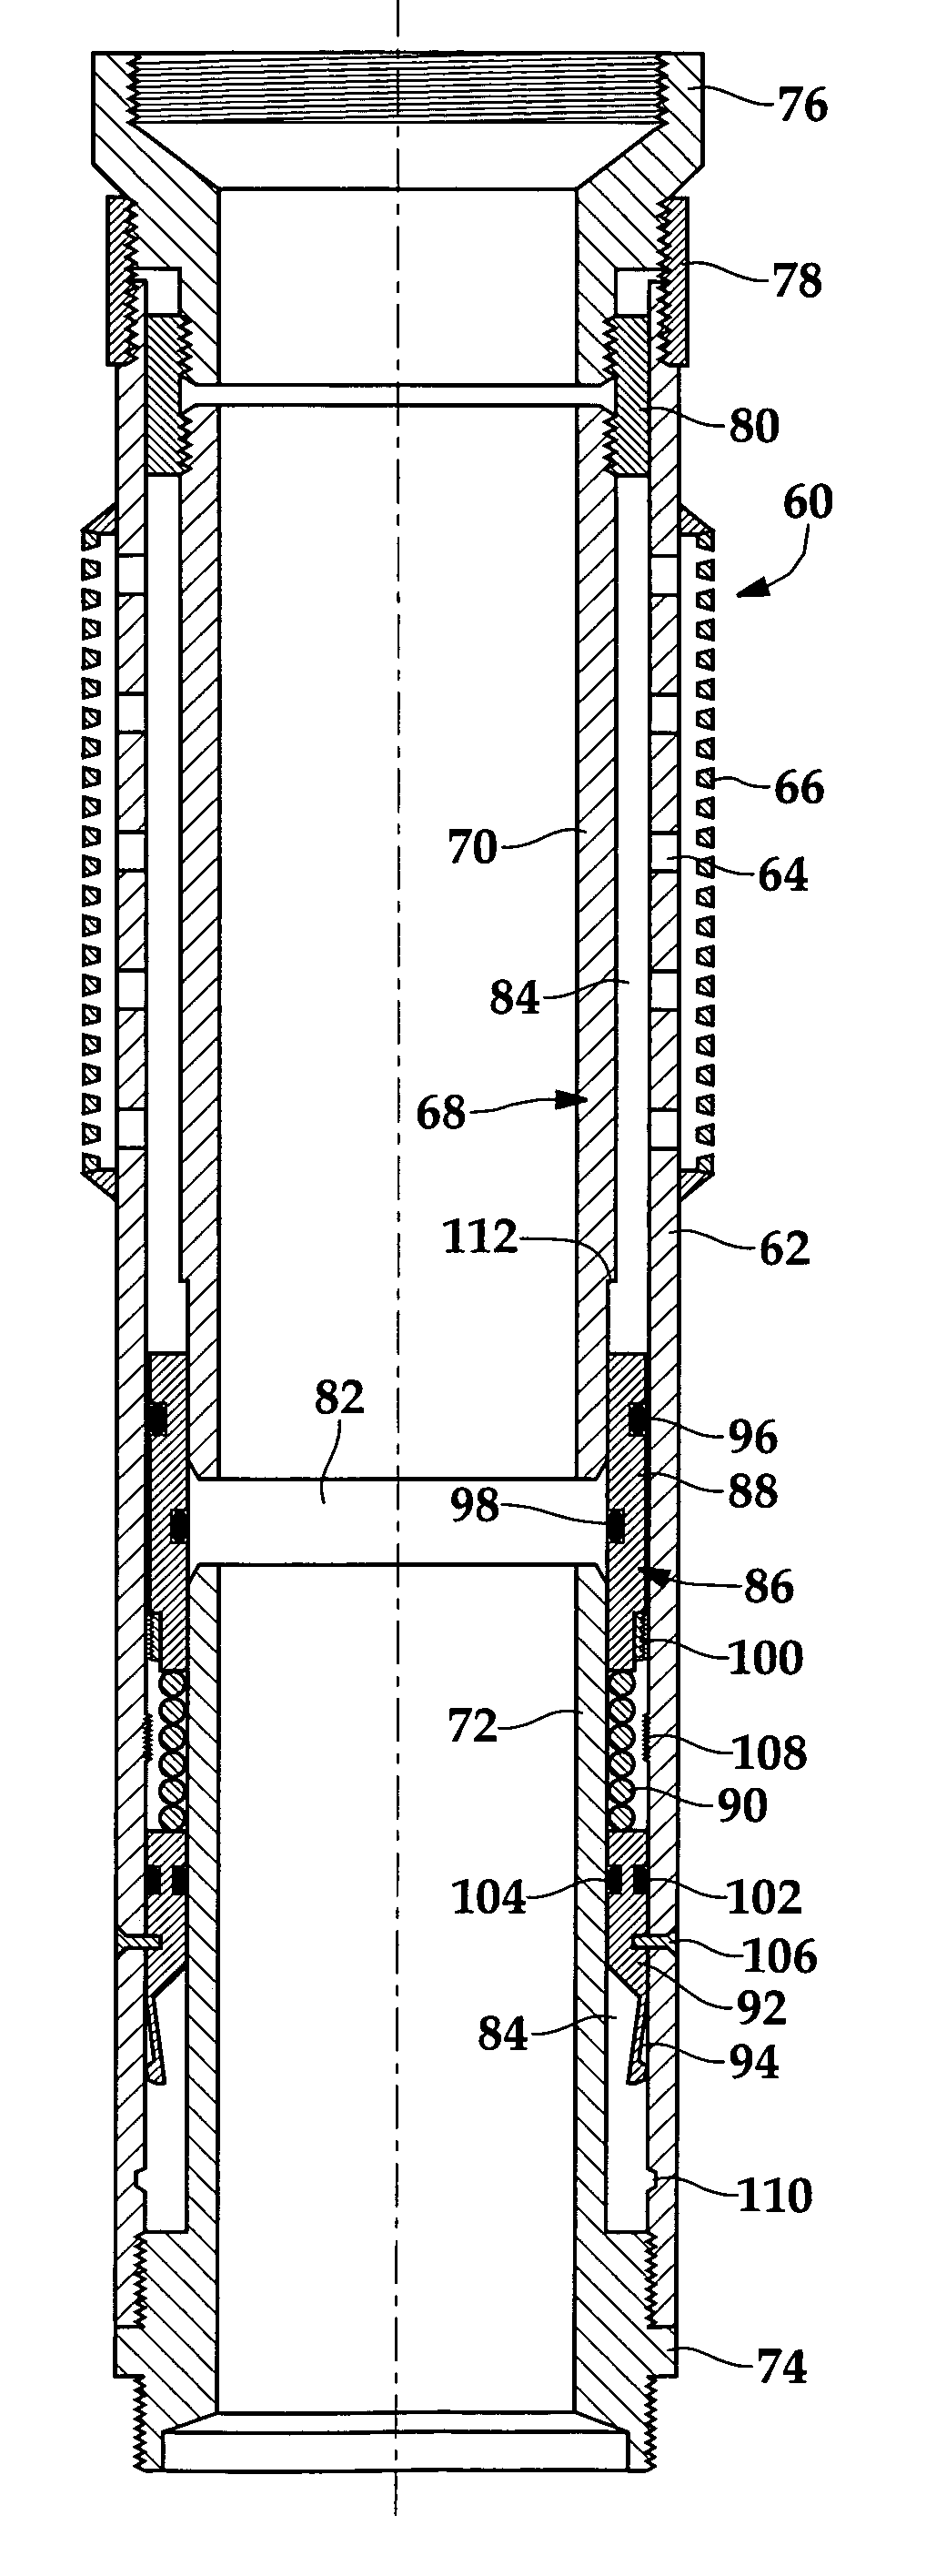 Sand control screen assembly having fluid loss control capability and method for use of same